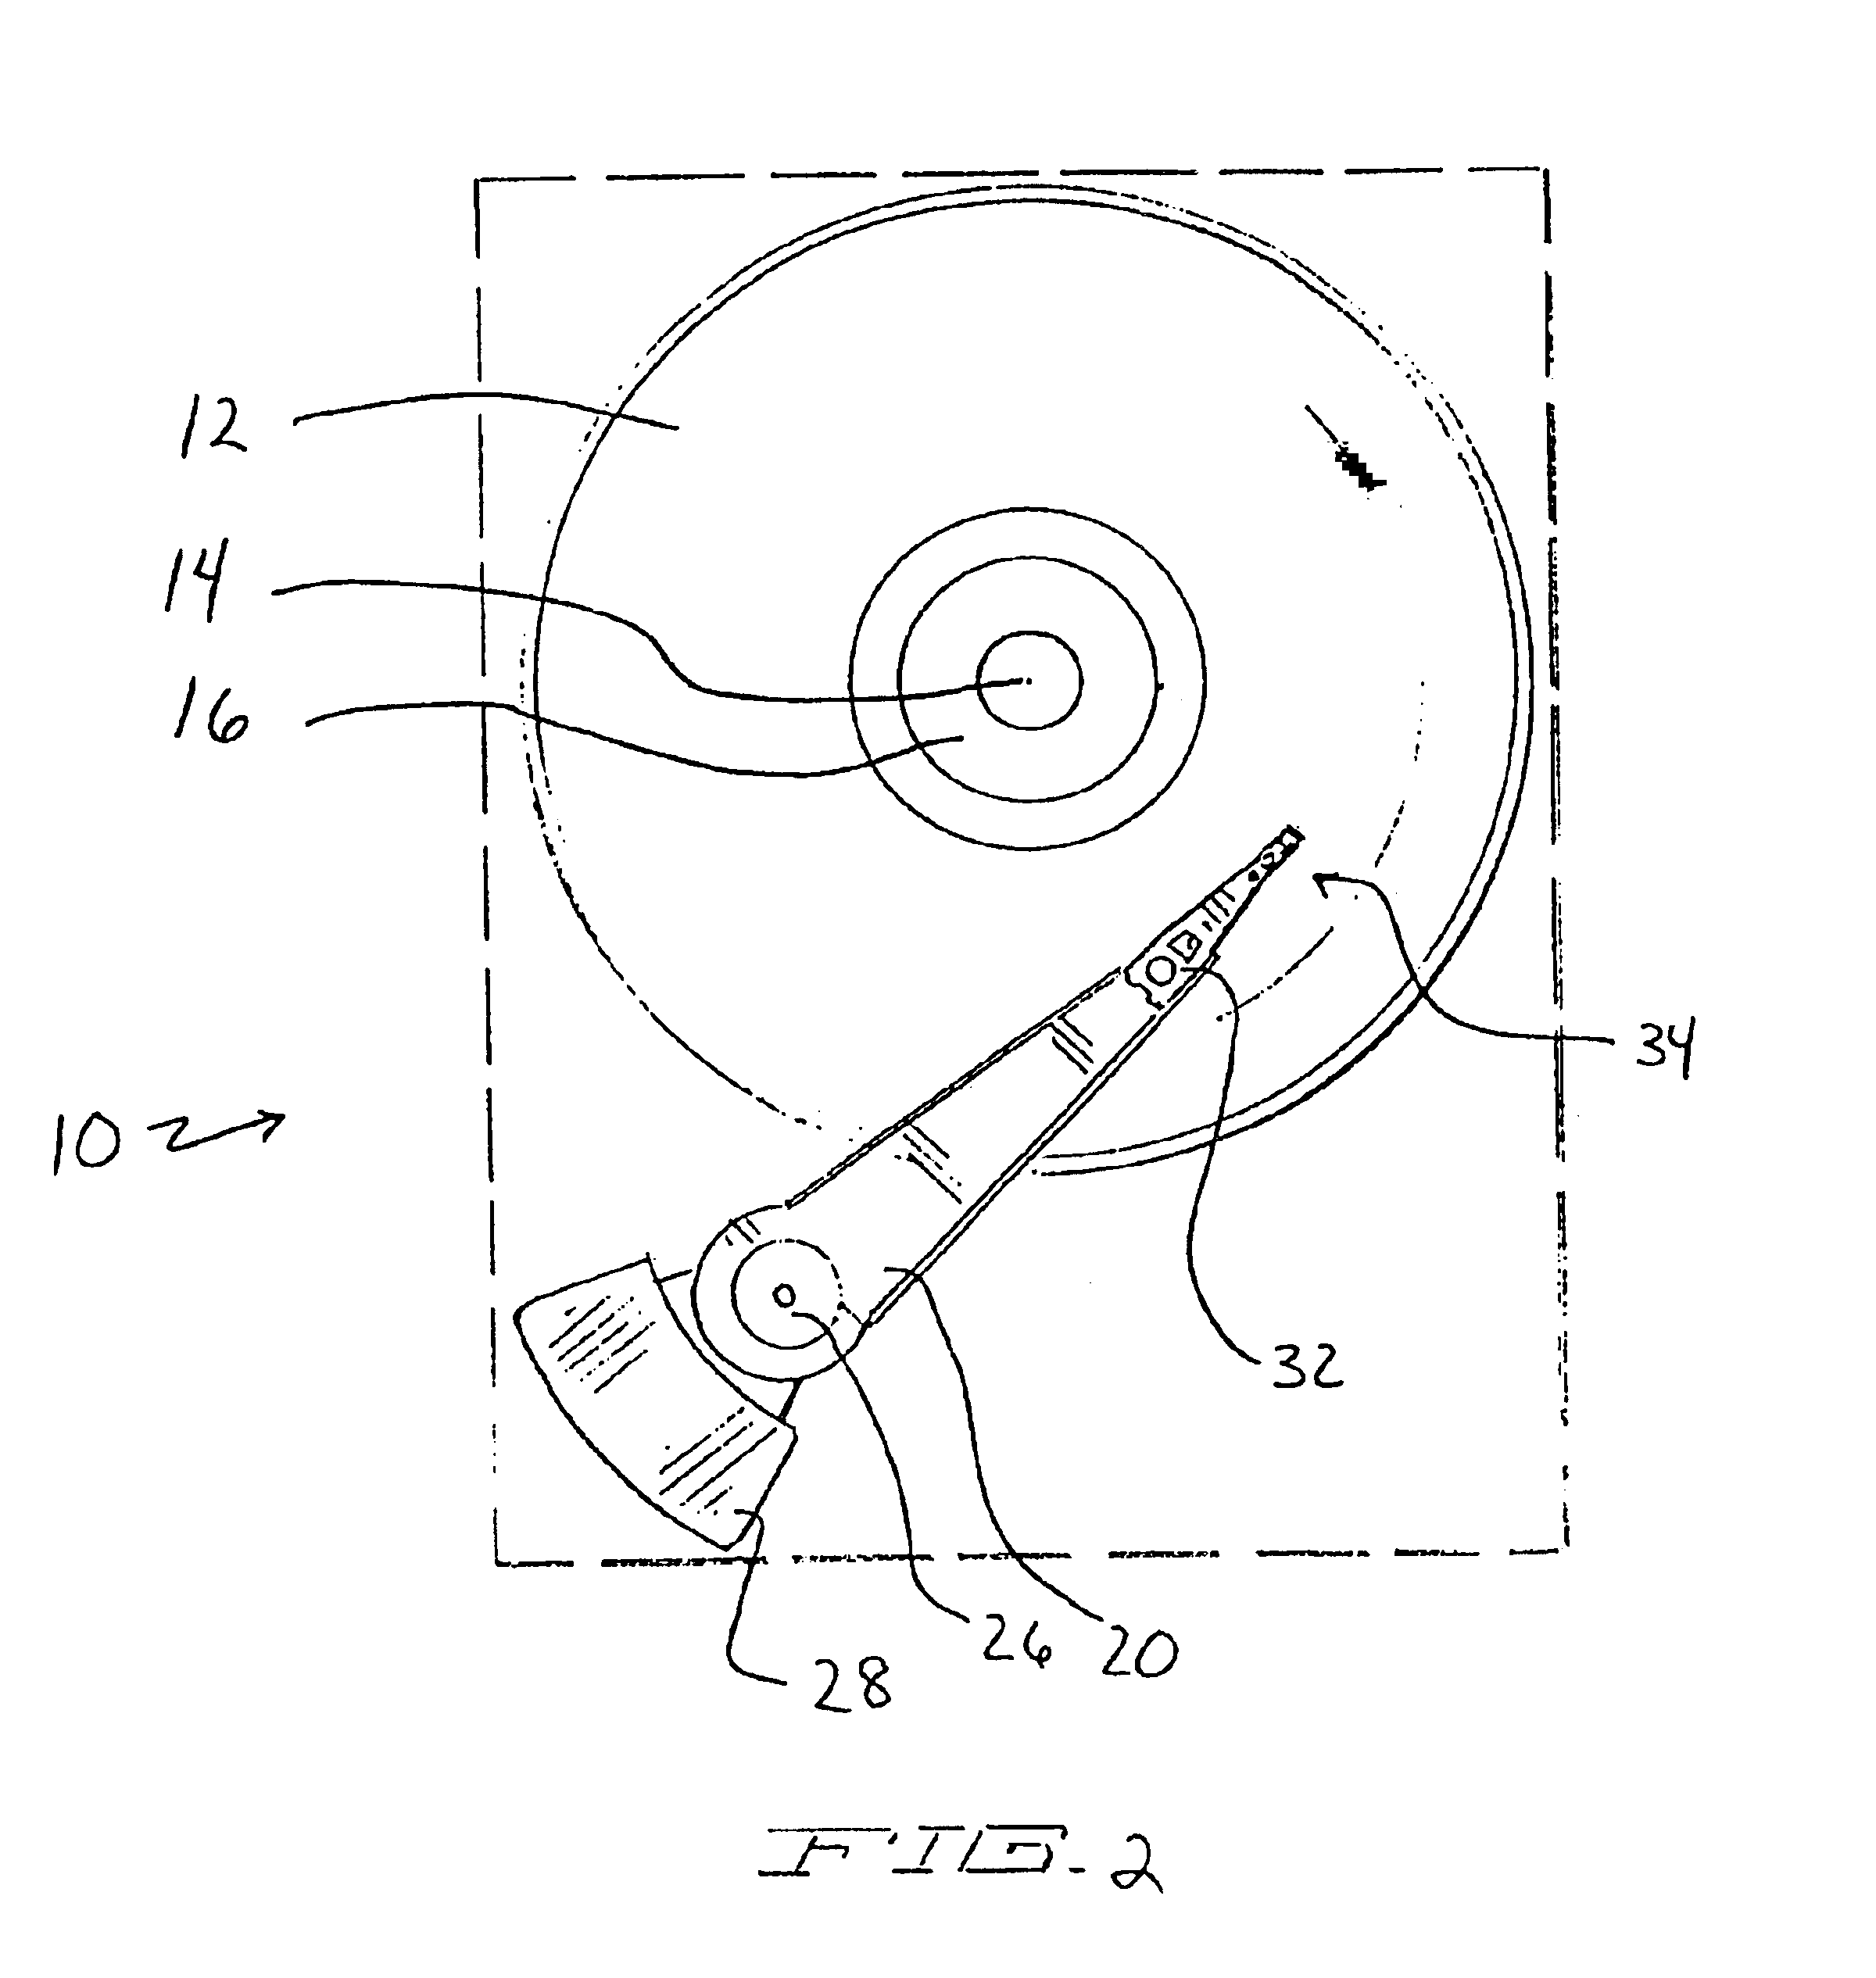 Electrical component and a shuntable/shunted electrical component and method for shunting and deshunting